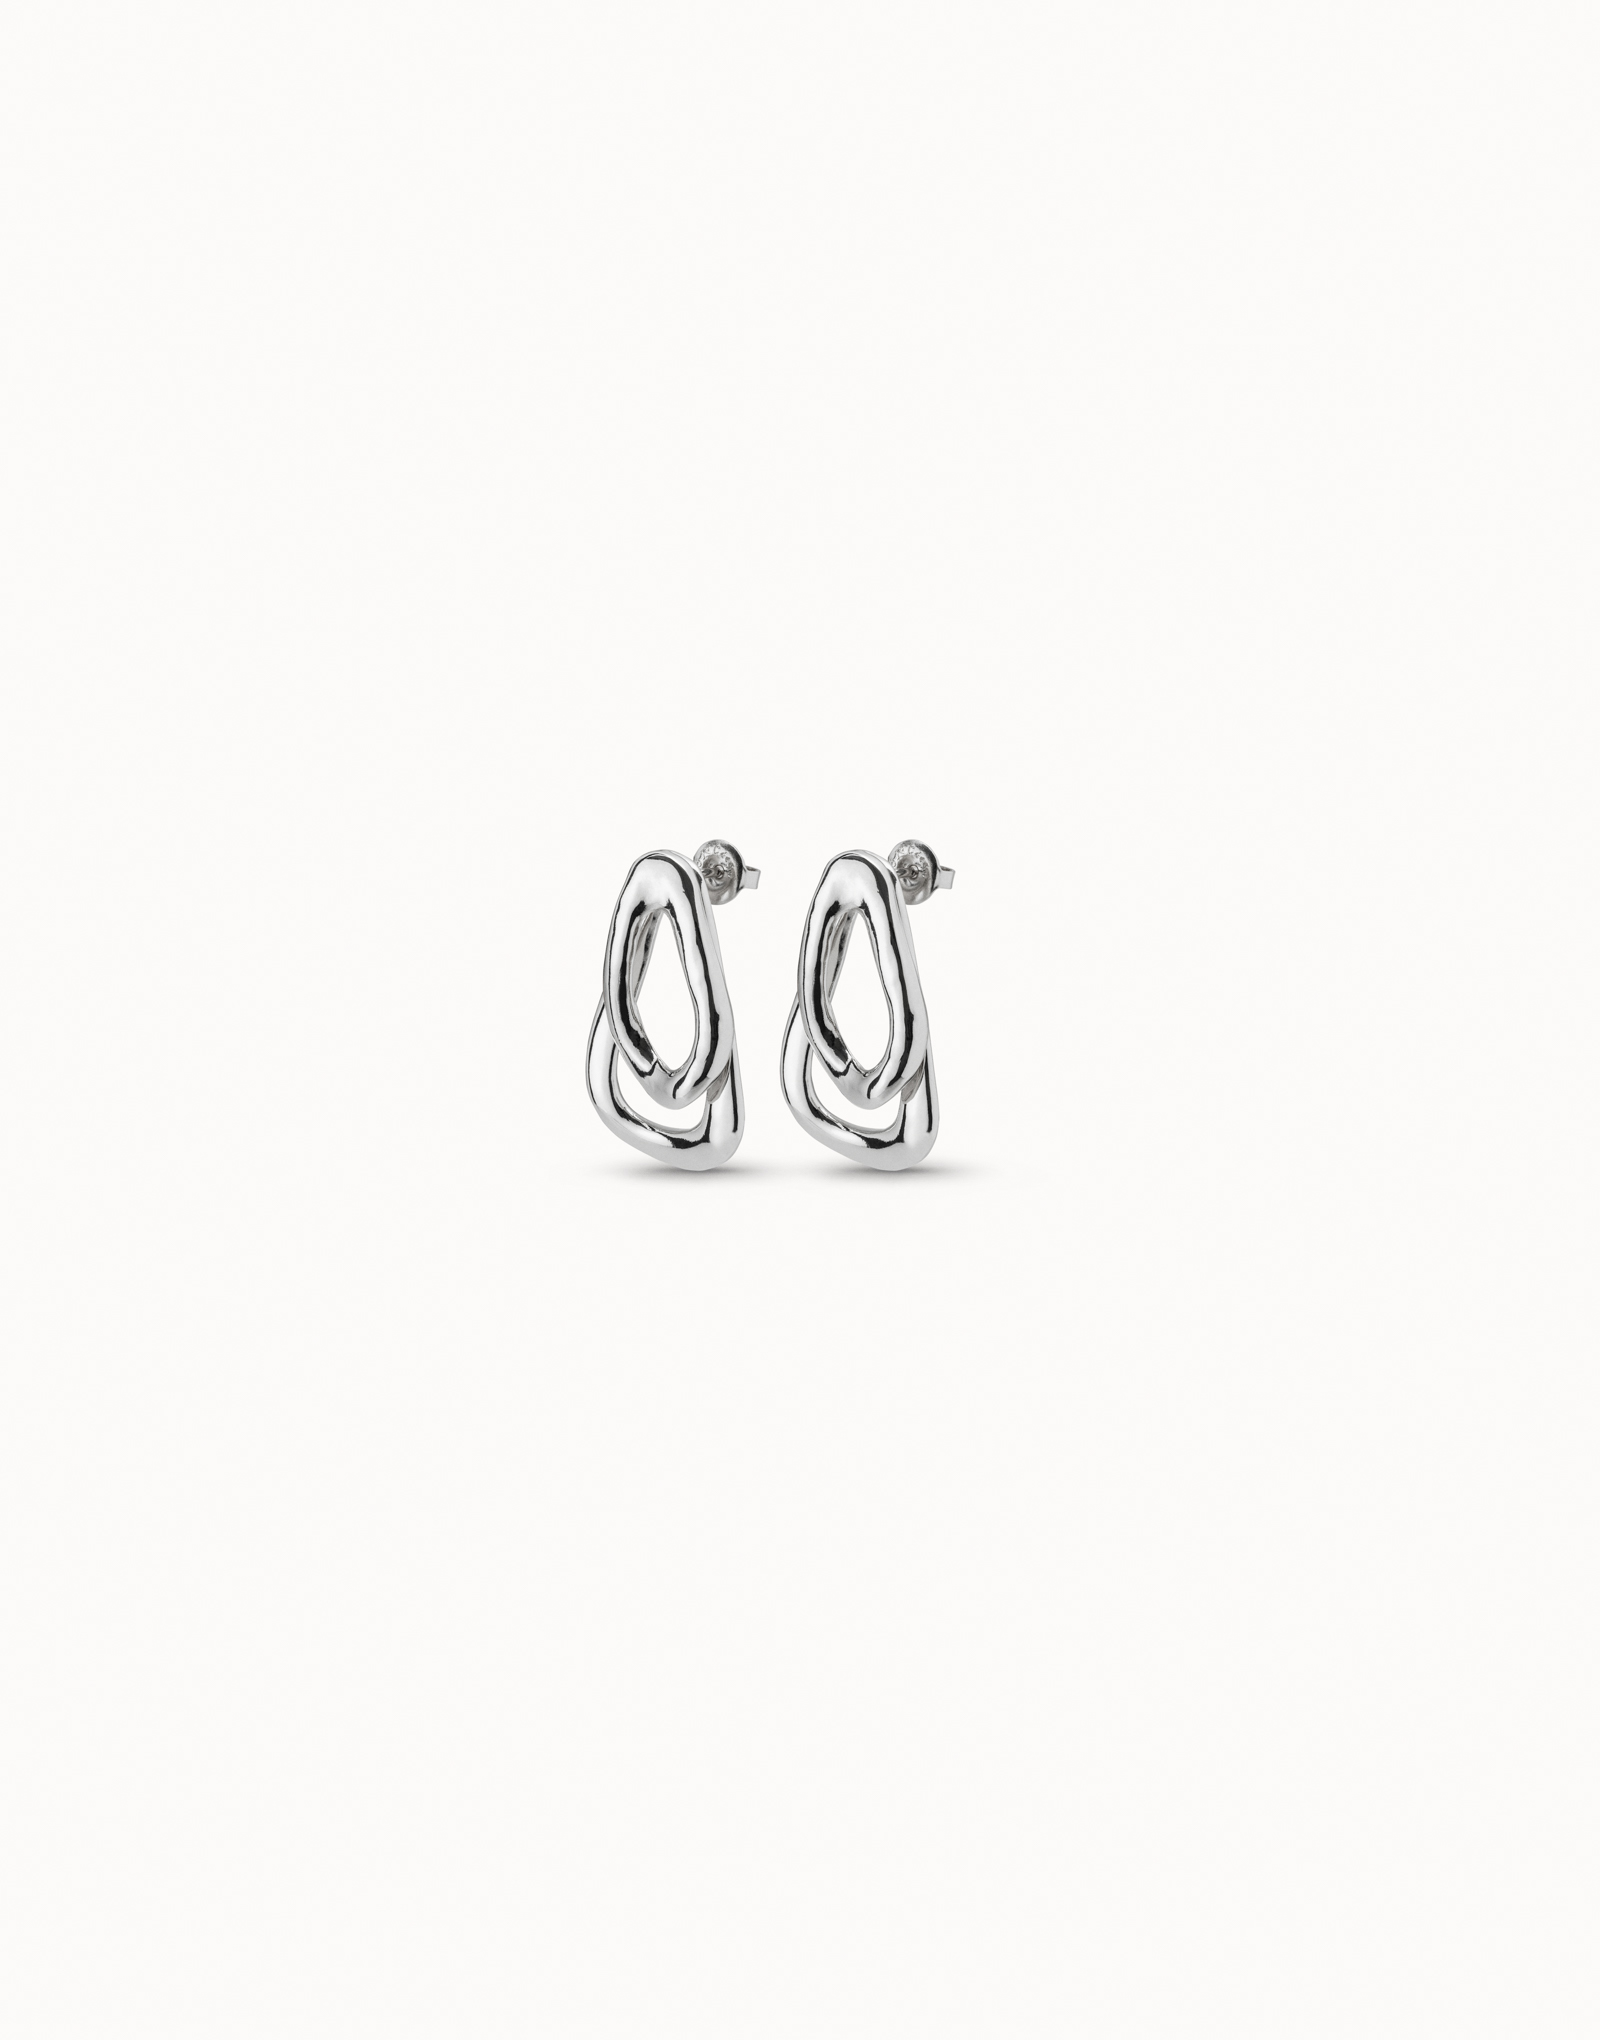 Orecchini placcati argento Sterling con 2 maglie sovrapposte, Argent, large image number null